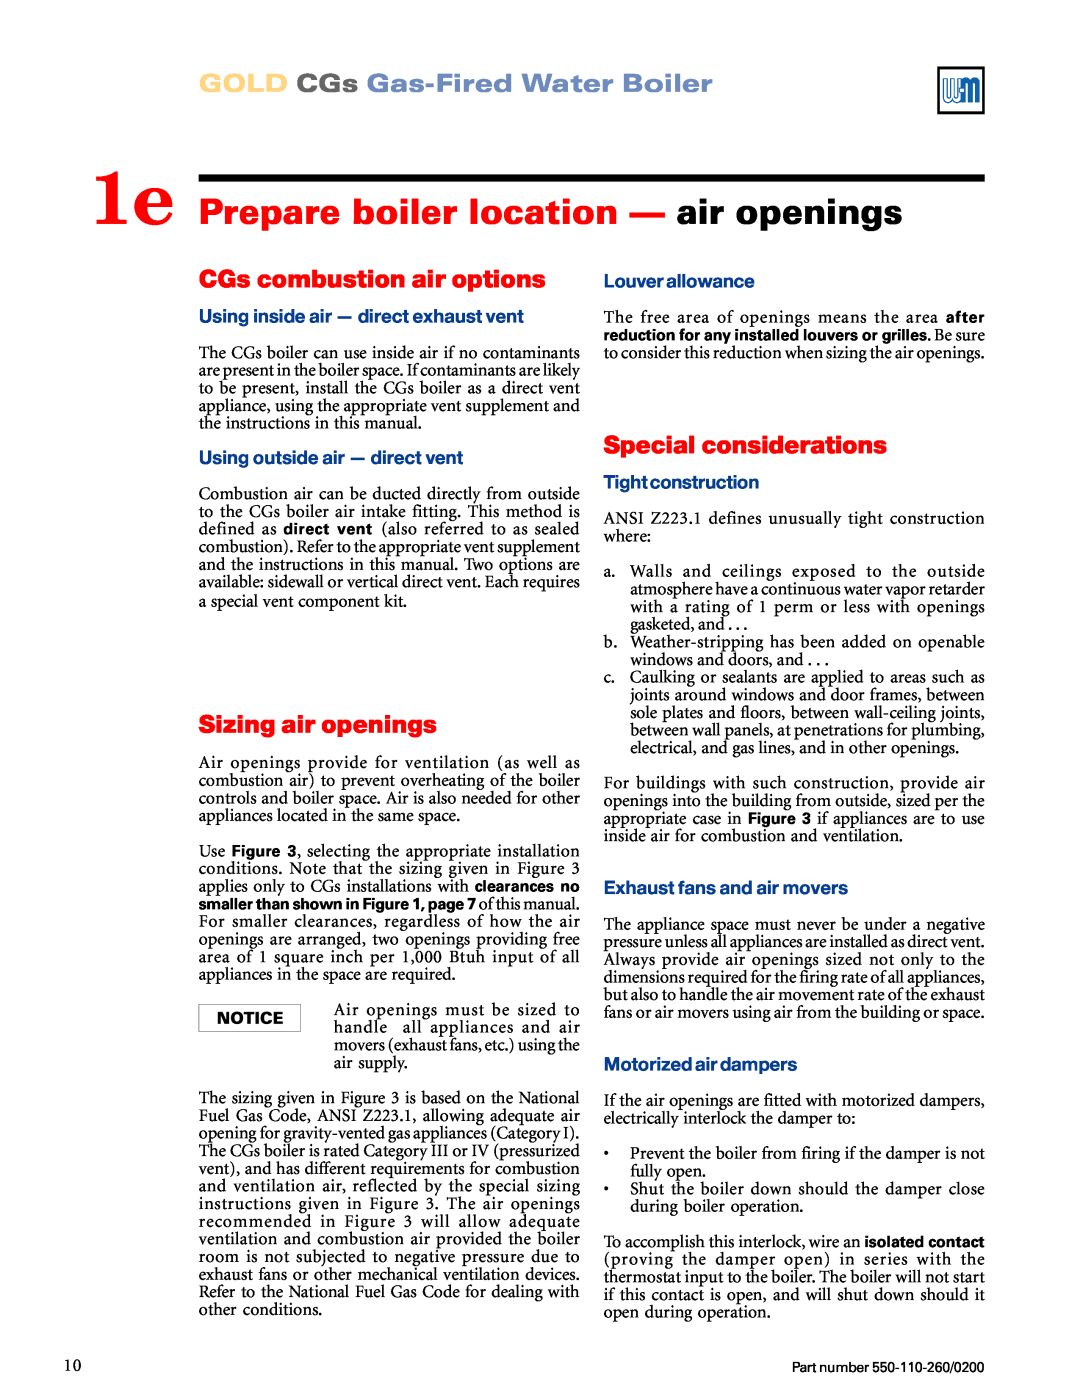 Weil-McLain 550-110-260/02002 1e Prepare boiler location — air openings, CGs combustion air options, Sizing air openings 